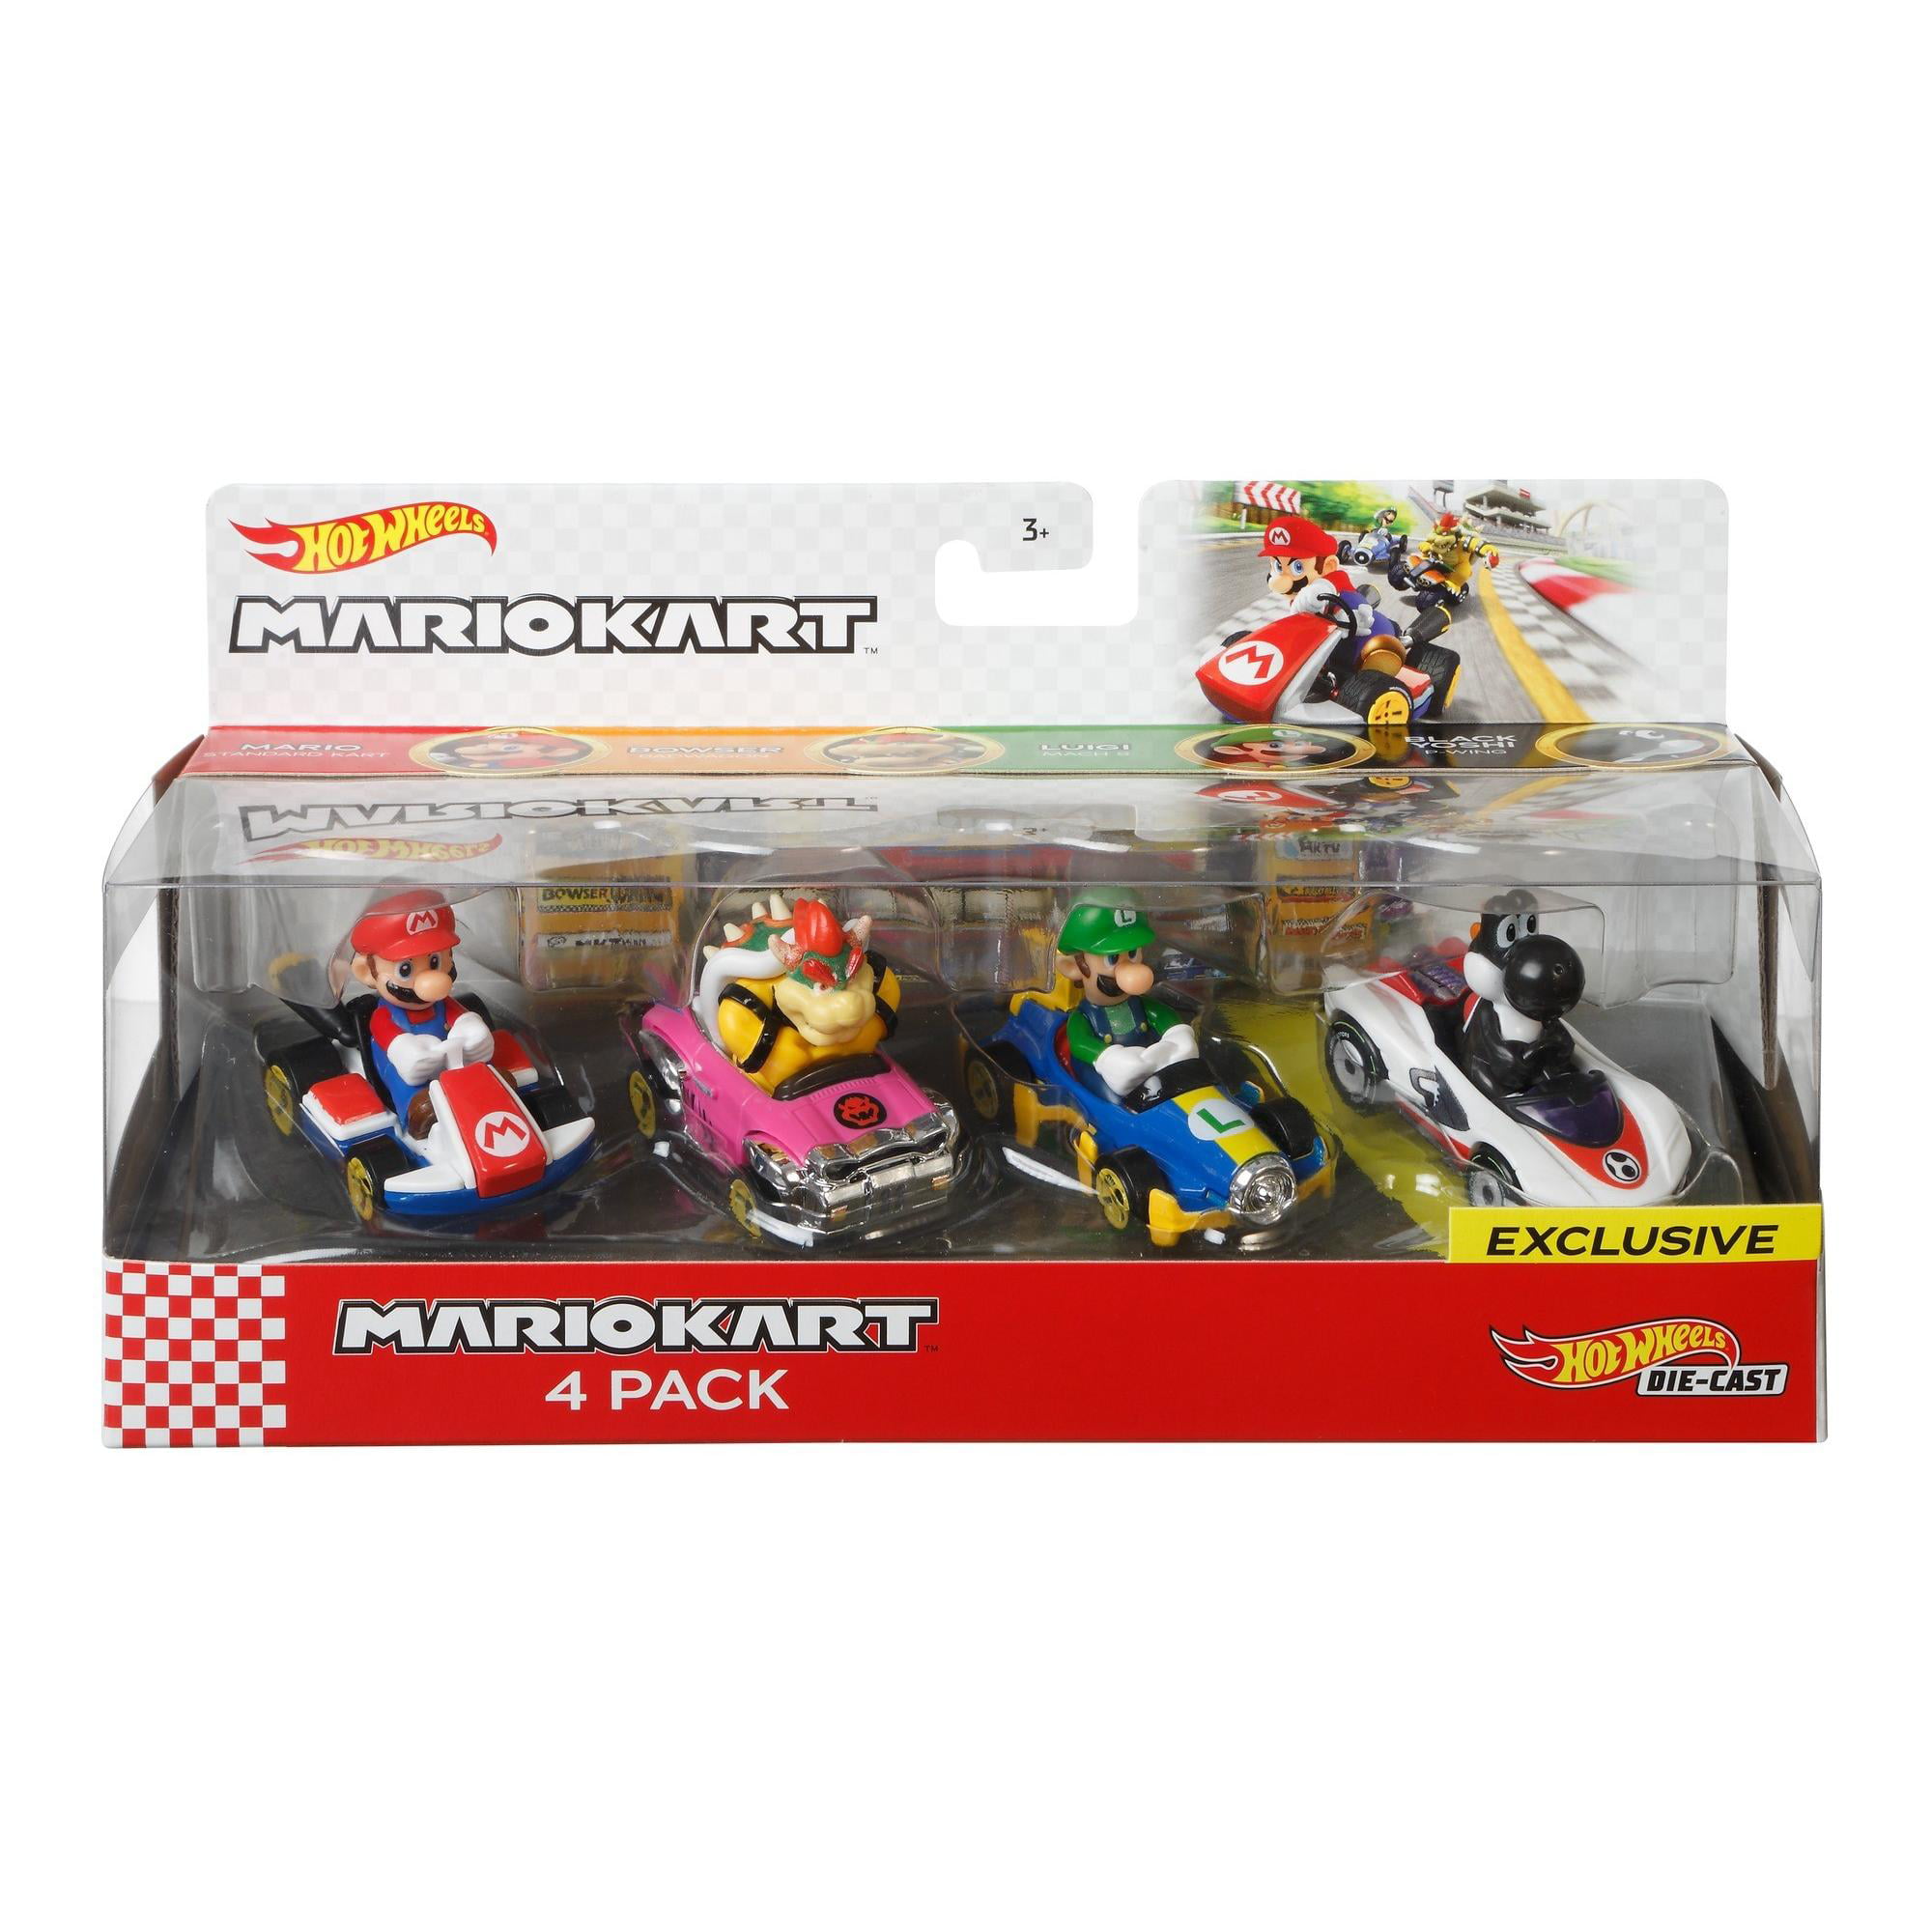 Hot Wheels Mario Kart Die-Cast Character Replicas in 4-Pack Each Assortment Includes Fan-Favorite Characters and 1 Exclusive Ages 3 and Older 